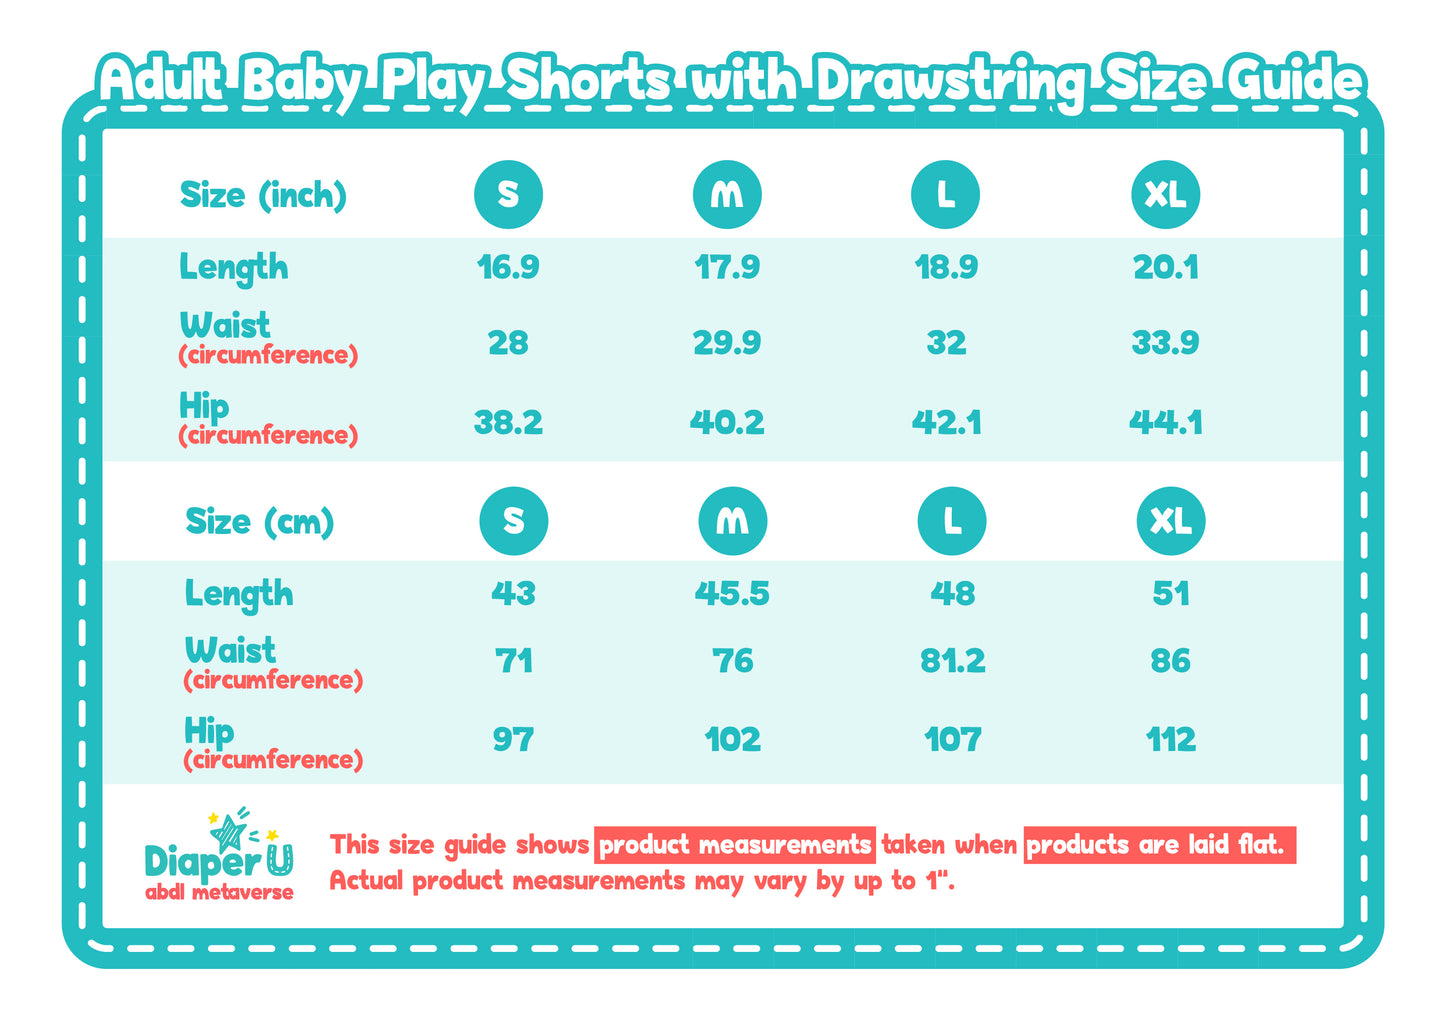 Adult Baby Play Shorts with Drawstring